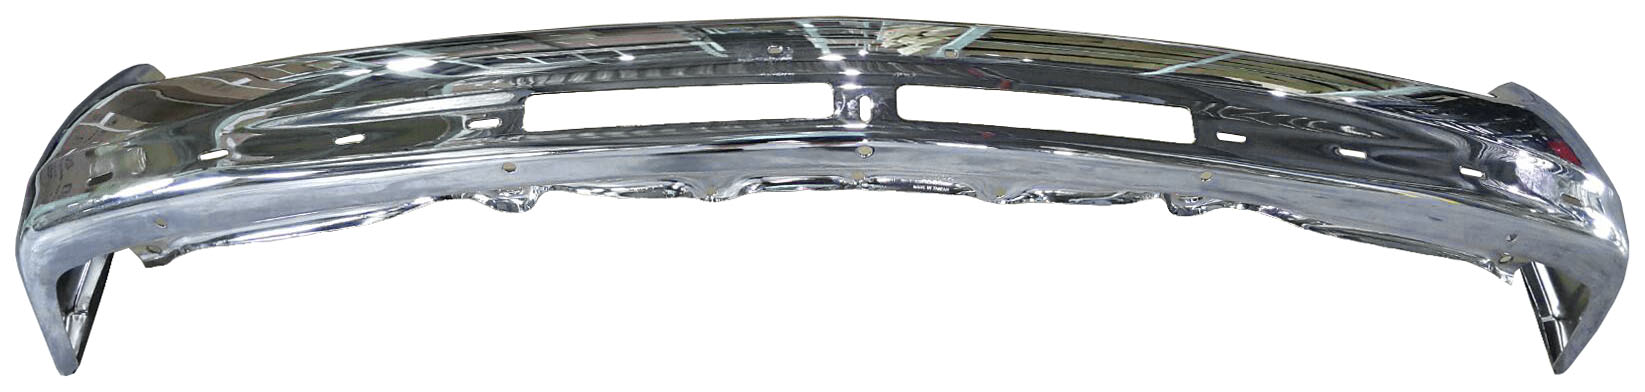 Aftermarket METAL FRONT BUMPERS for CHEVROLET - SUBURBAN 1500, SUBURBAN 1500,00-06,Front bumper face bar